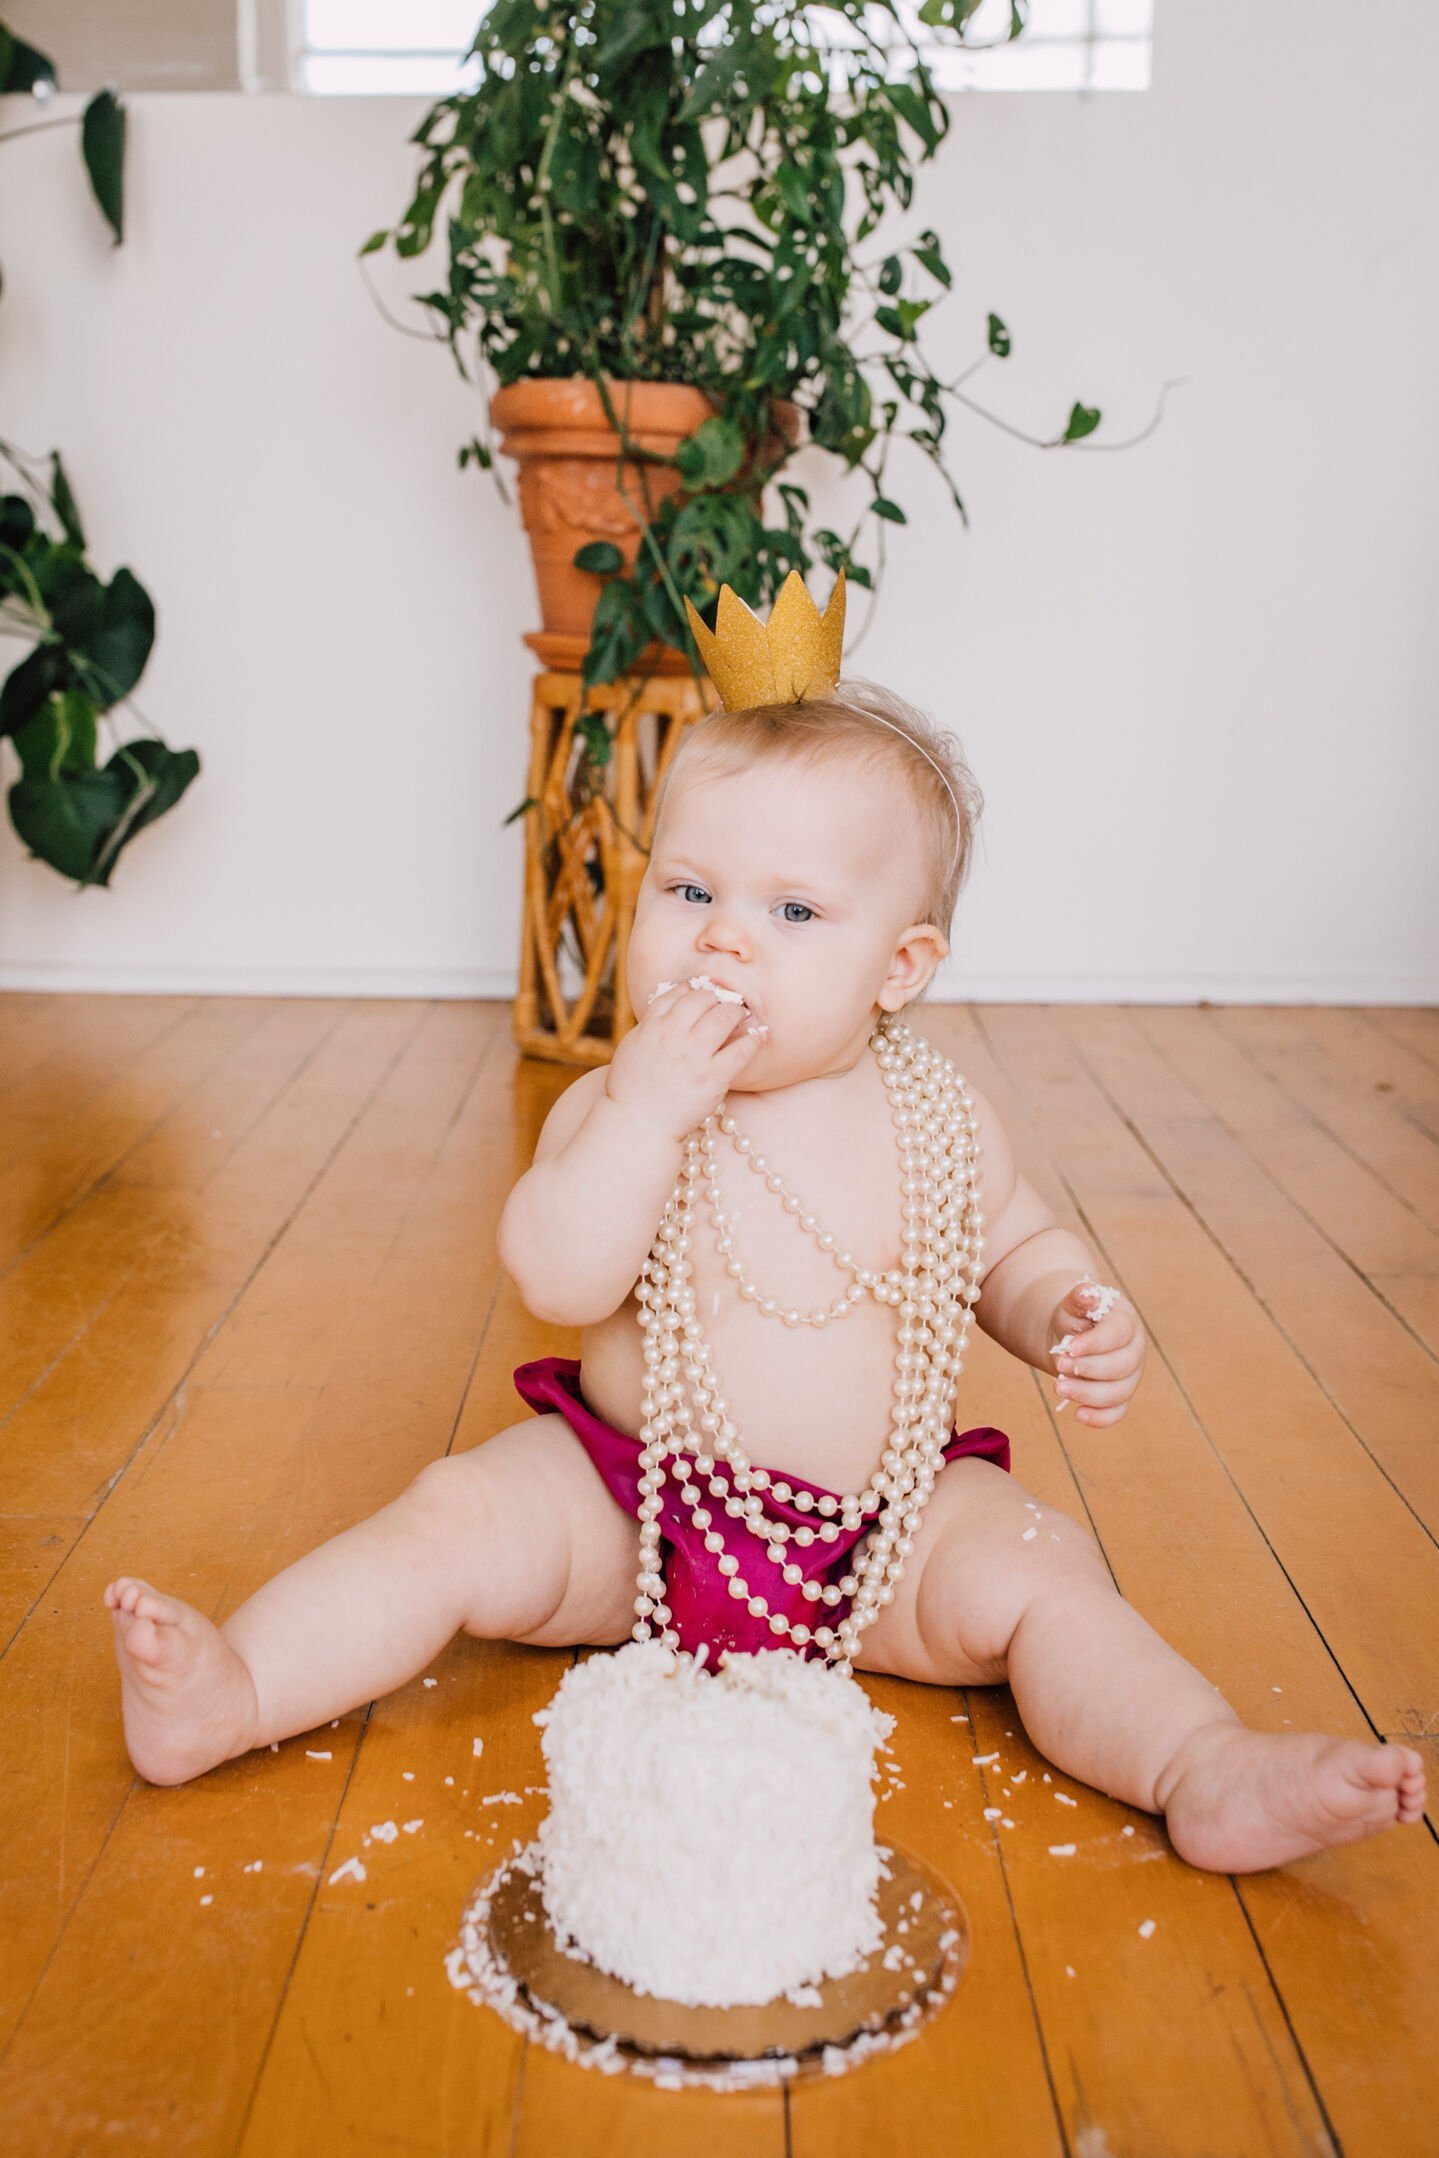  Baby girl wears pearls and a crown during a cake smash session 